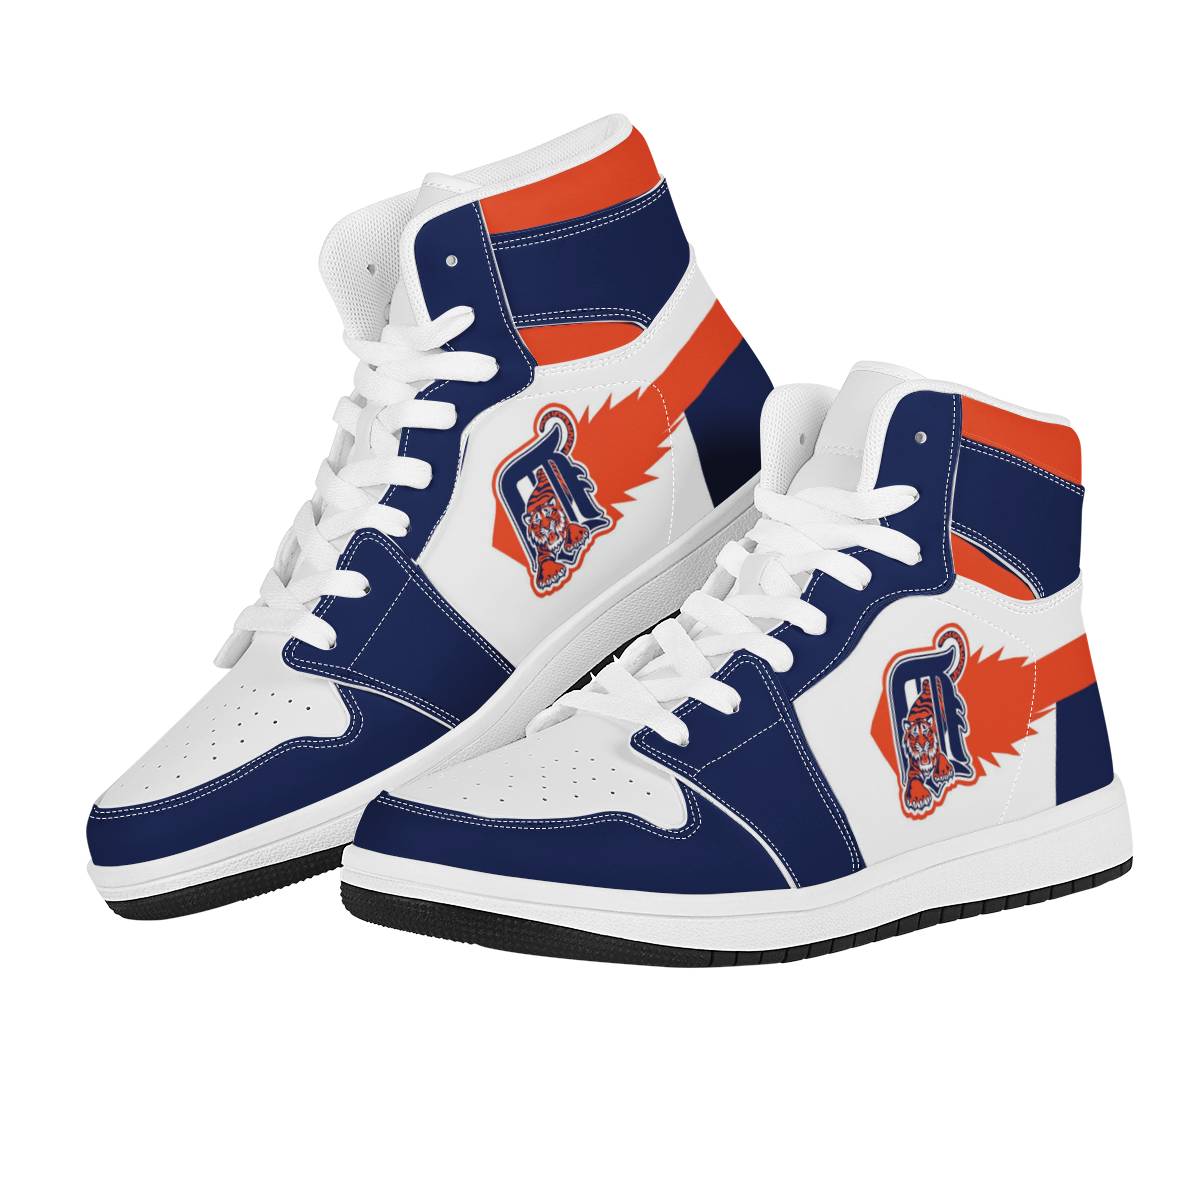 Women's Detroit Tigers High Top Leather AJ1 Sneakers 001